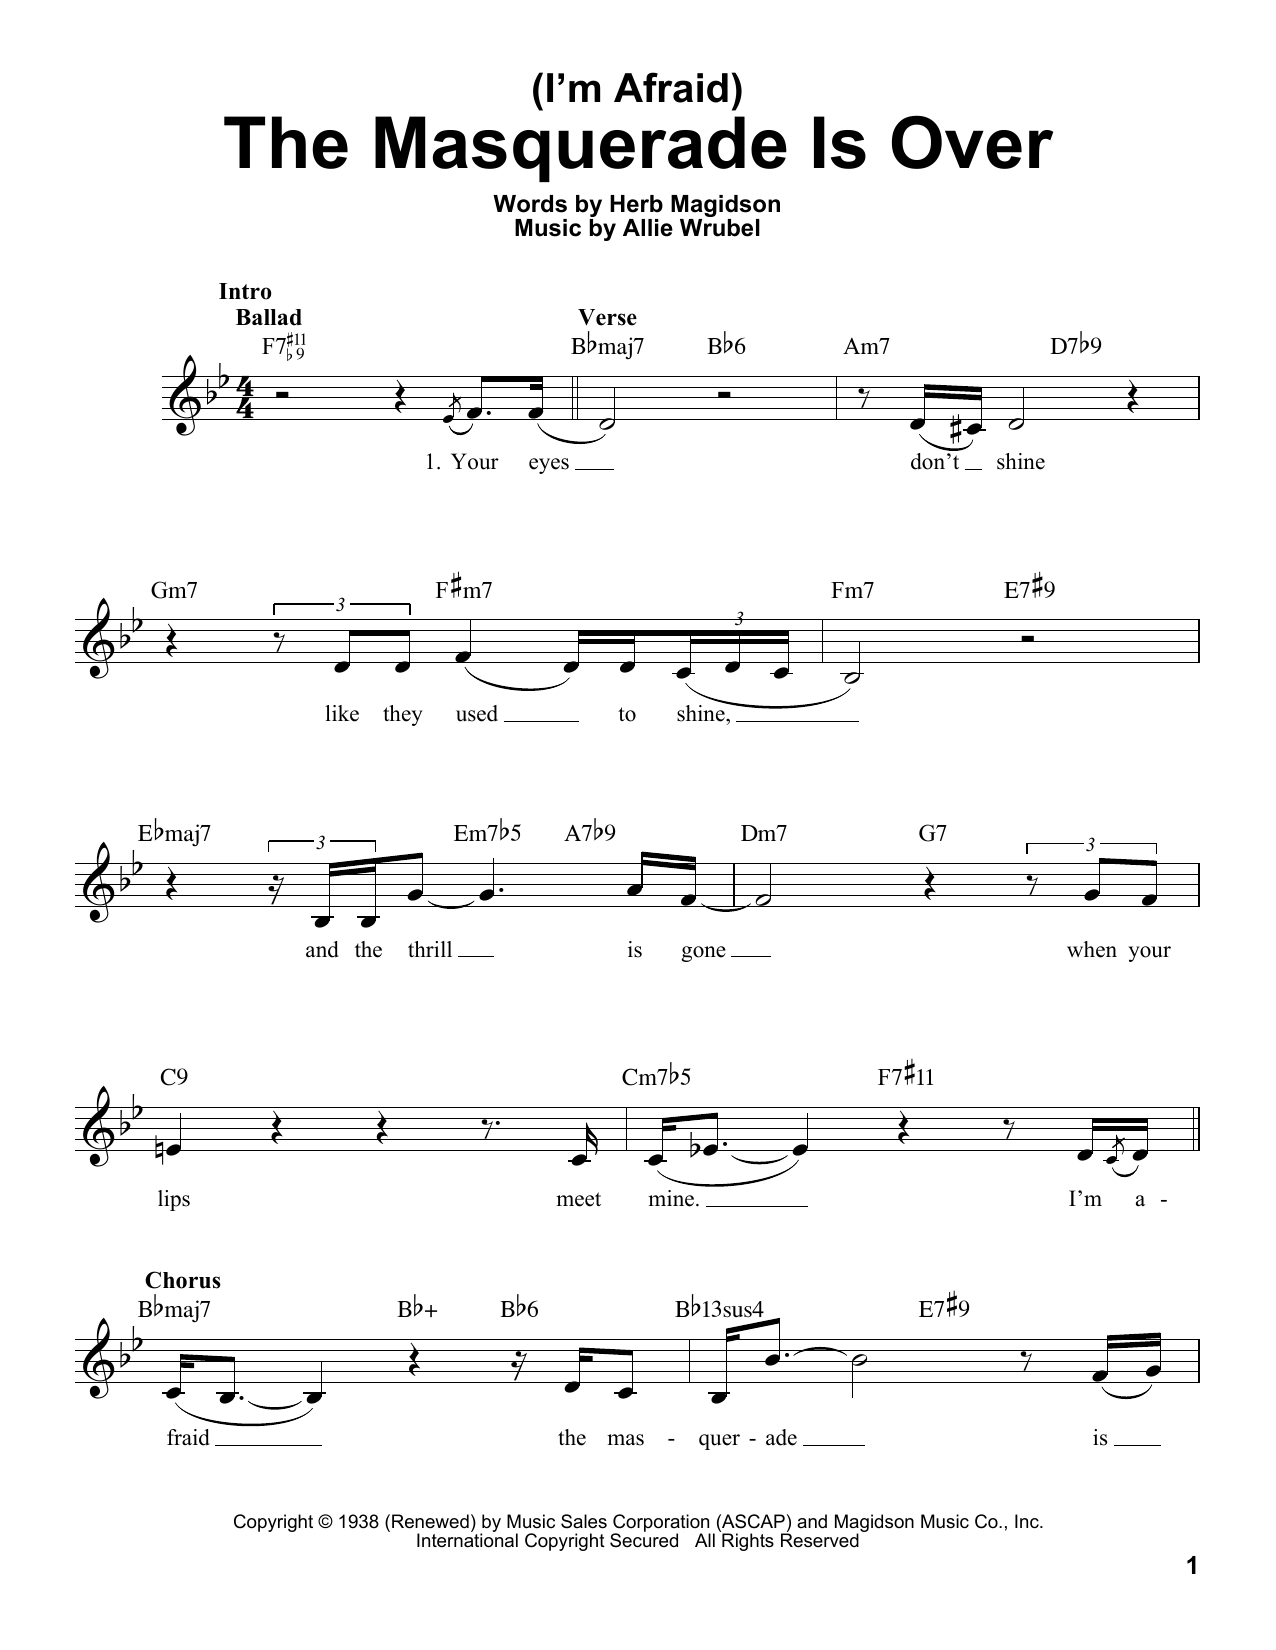 Allie Wrubel (I'm Afraid) The Masquerade Is Over sheet music notes printable PDF score